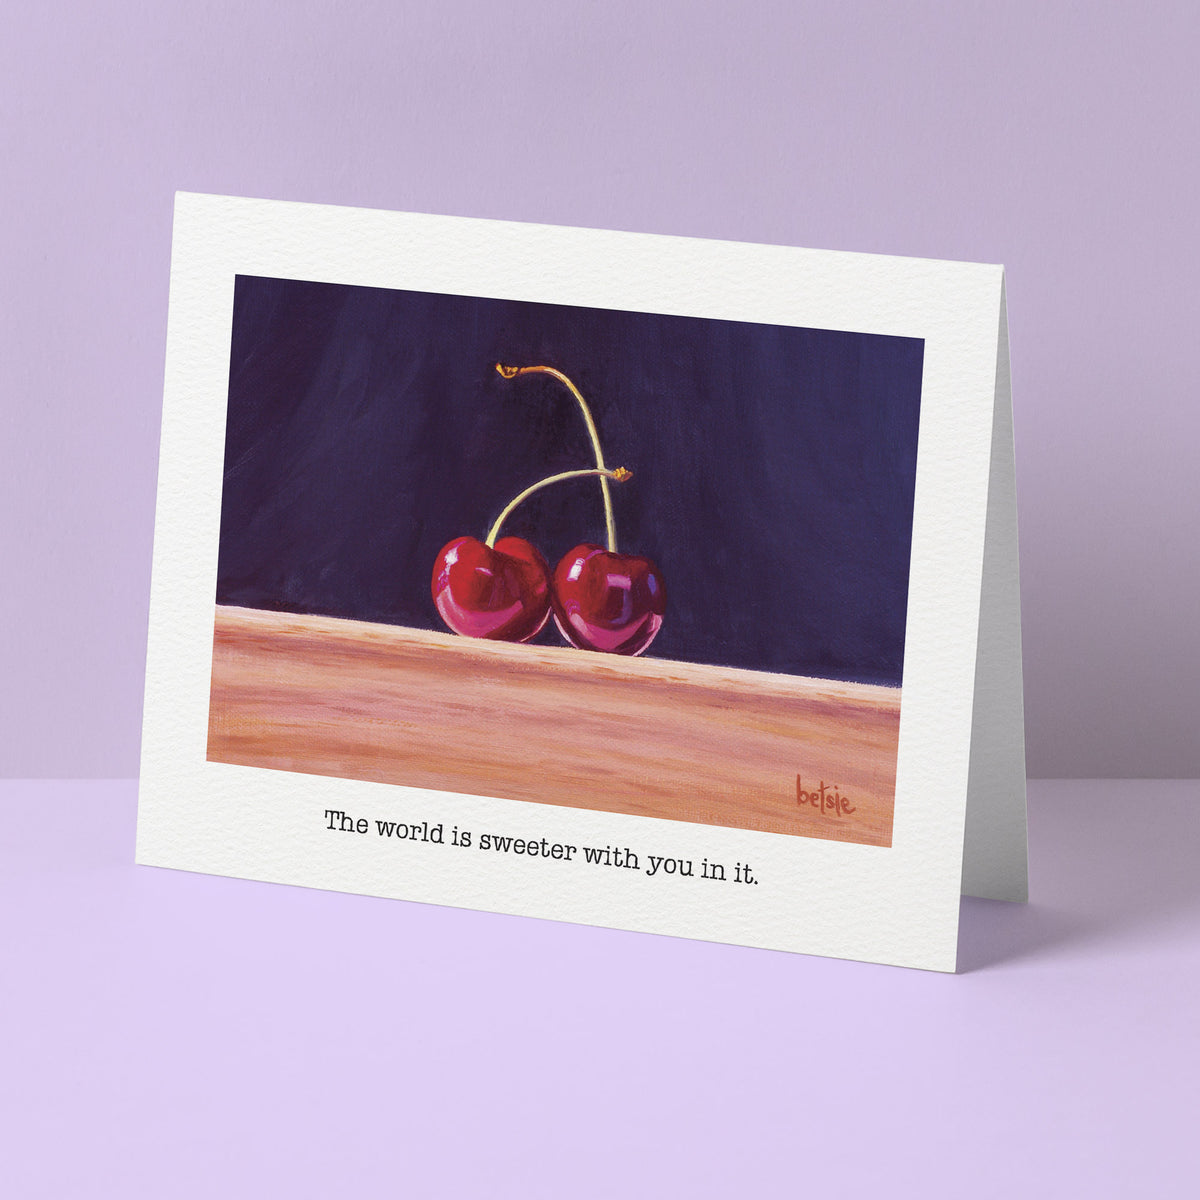 "The world is sweeter with you in it" Greeting Card